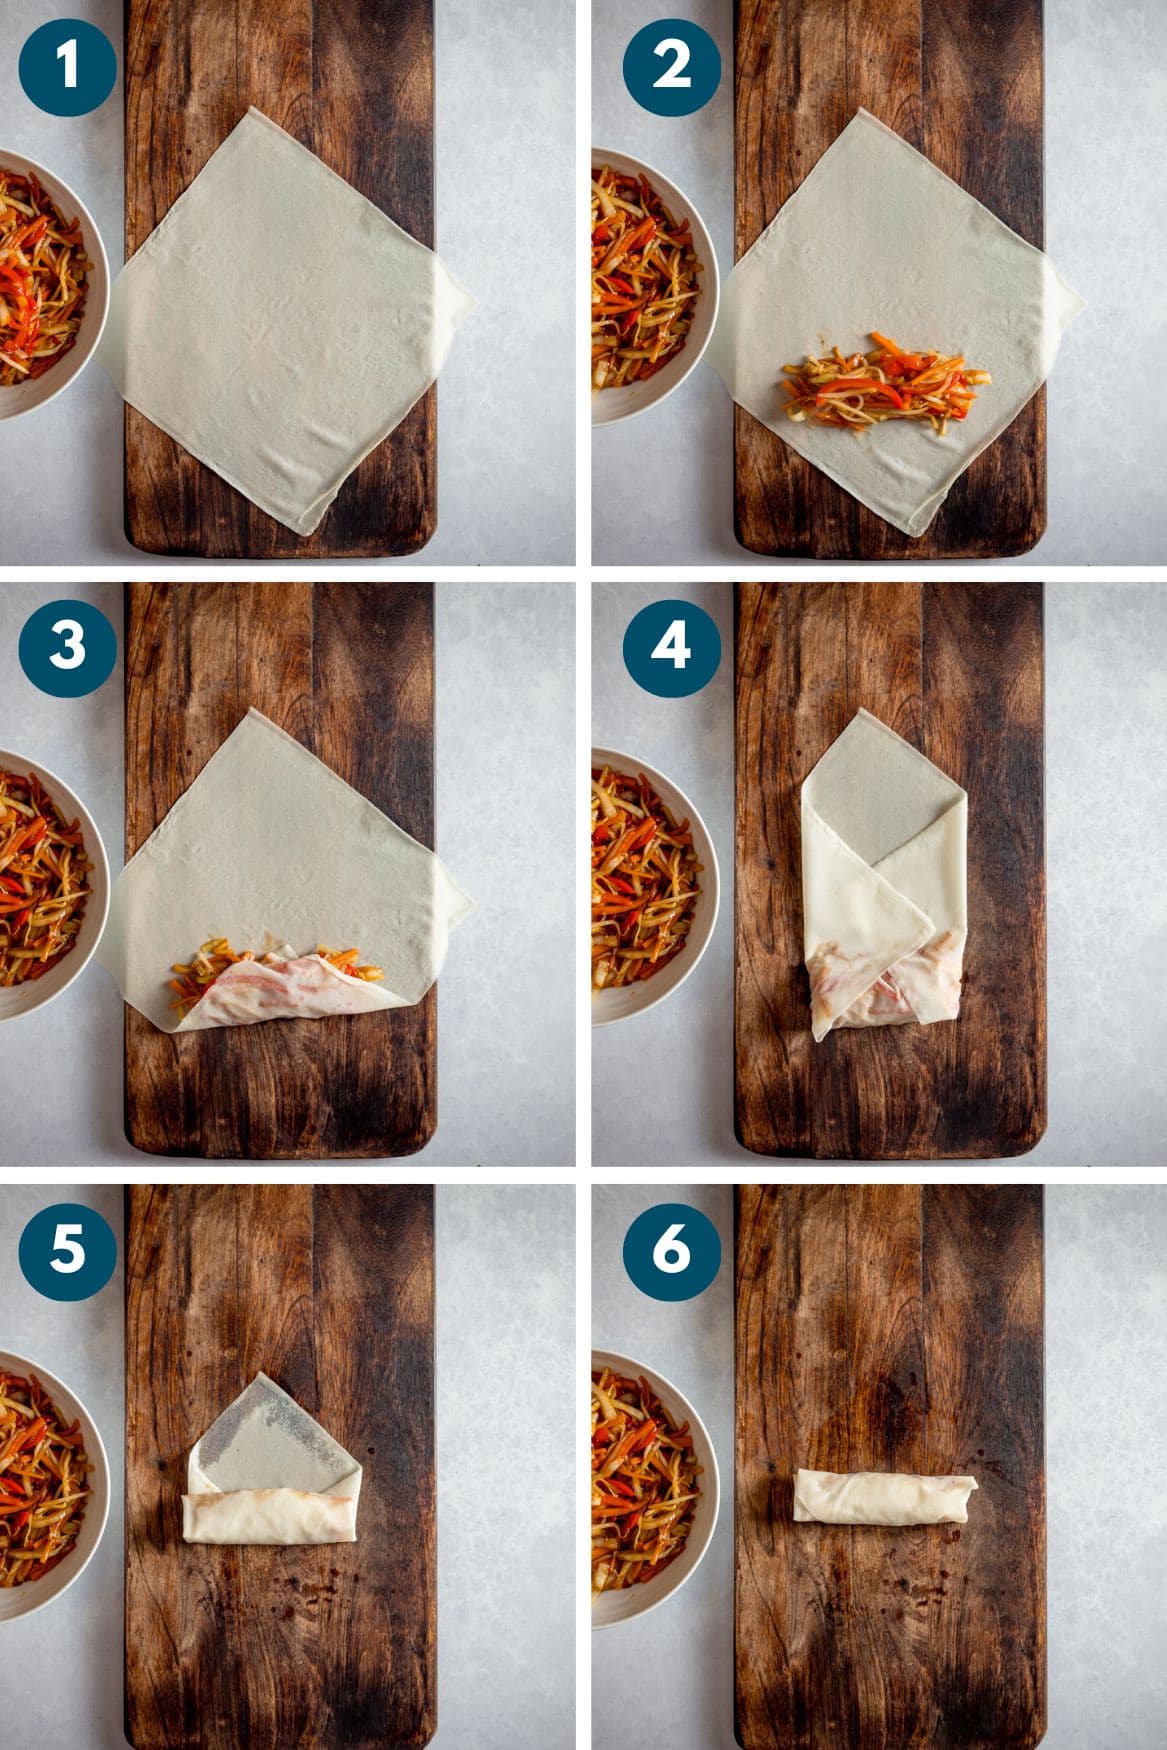 A collage of 6 numbered photos shoring the process of wrapping spring rolls.